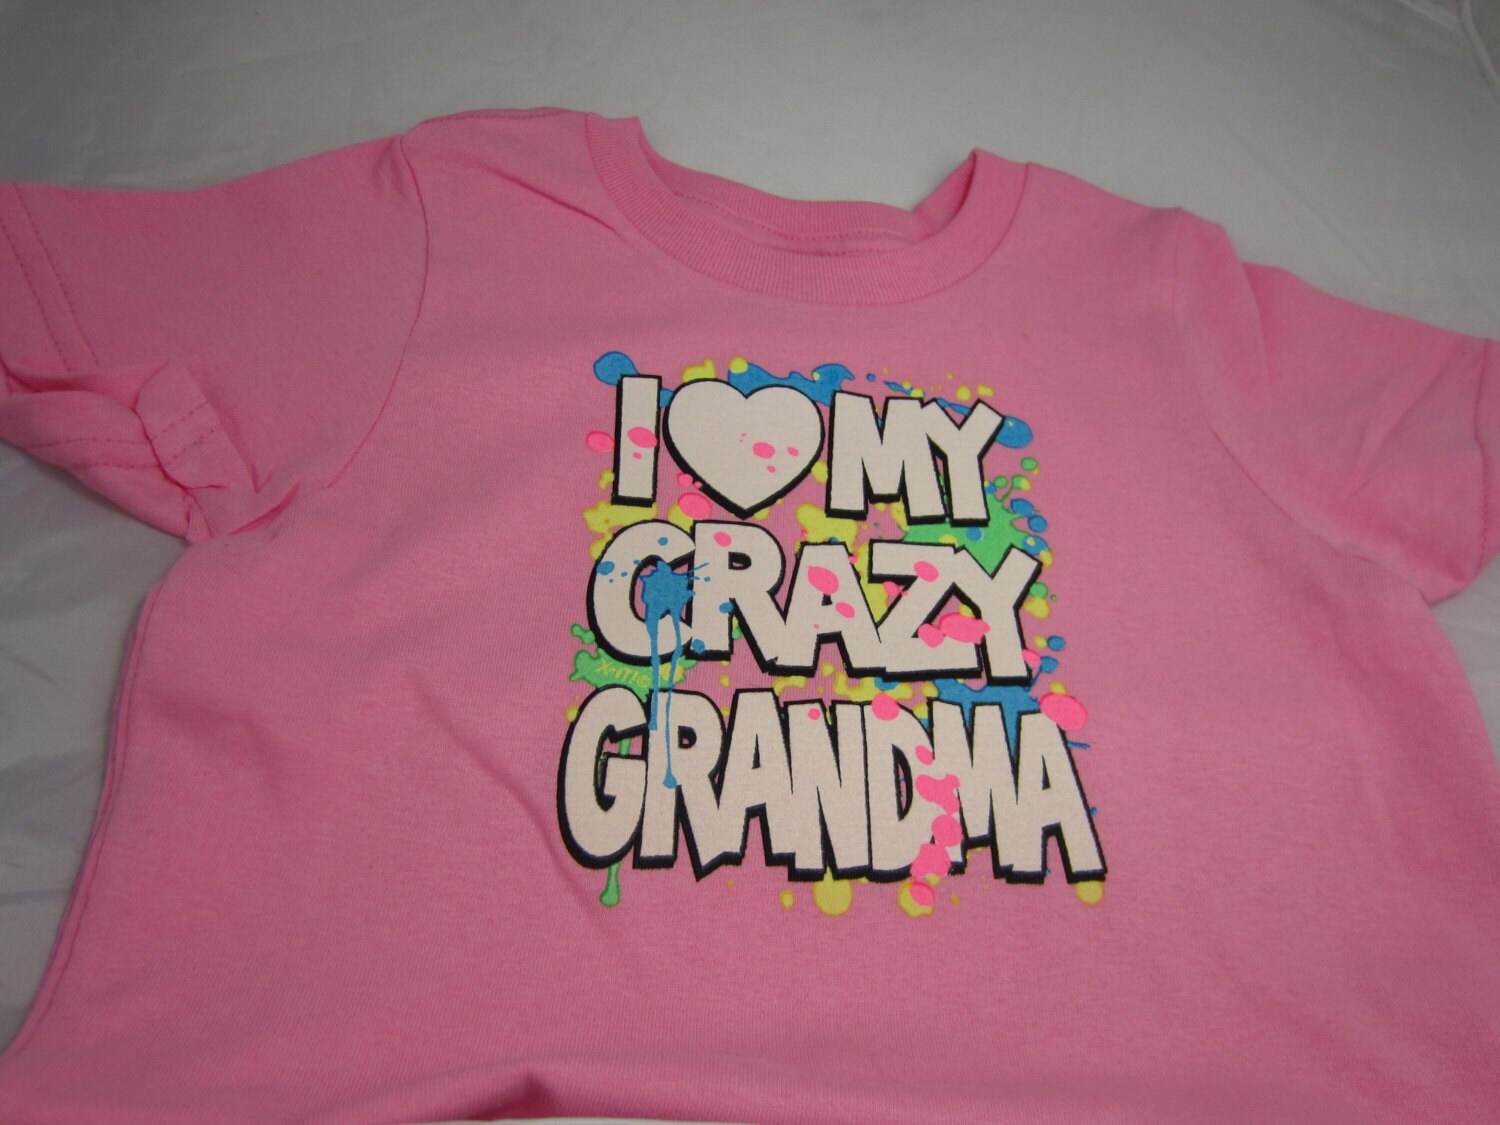 I Love My Crazy Grandma Toddler T Shirt front by UltimateGraphix